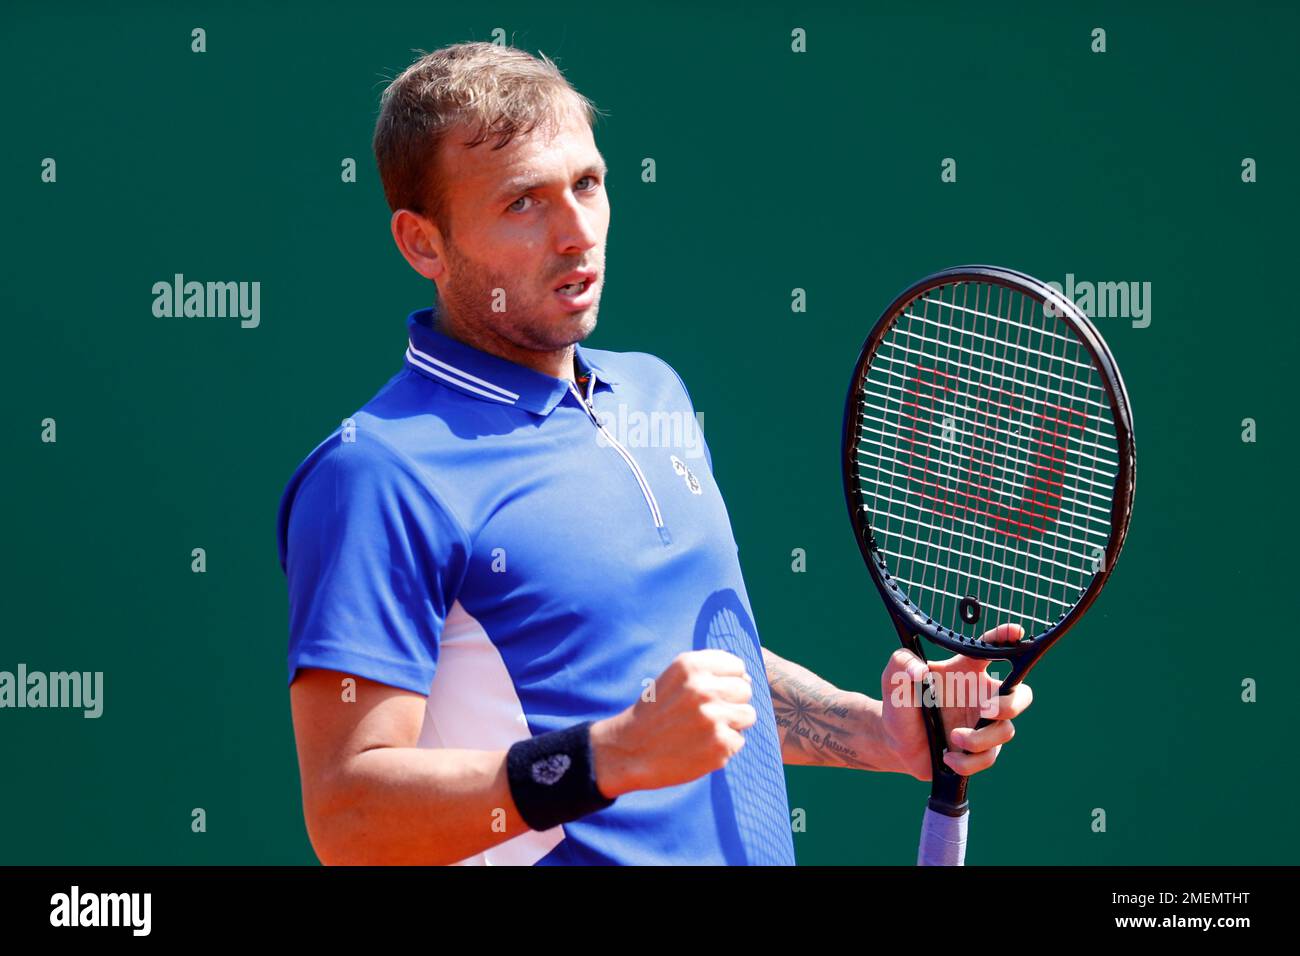 Daniel Evans of Britain reacts after scoring a point against David Goffin of Belgium during their quarterfinal match of the Monte Carlo Tennis Masters tournament in Monaco, Friday, April 16, 2021